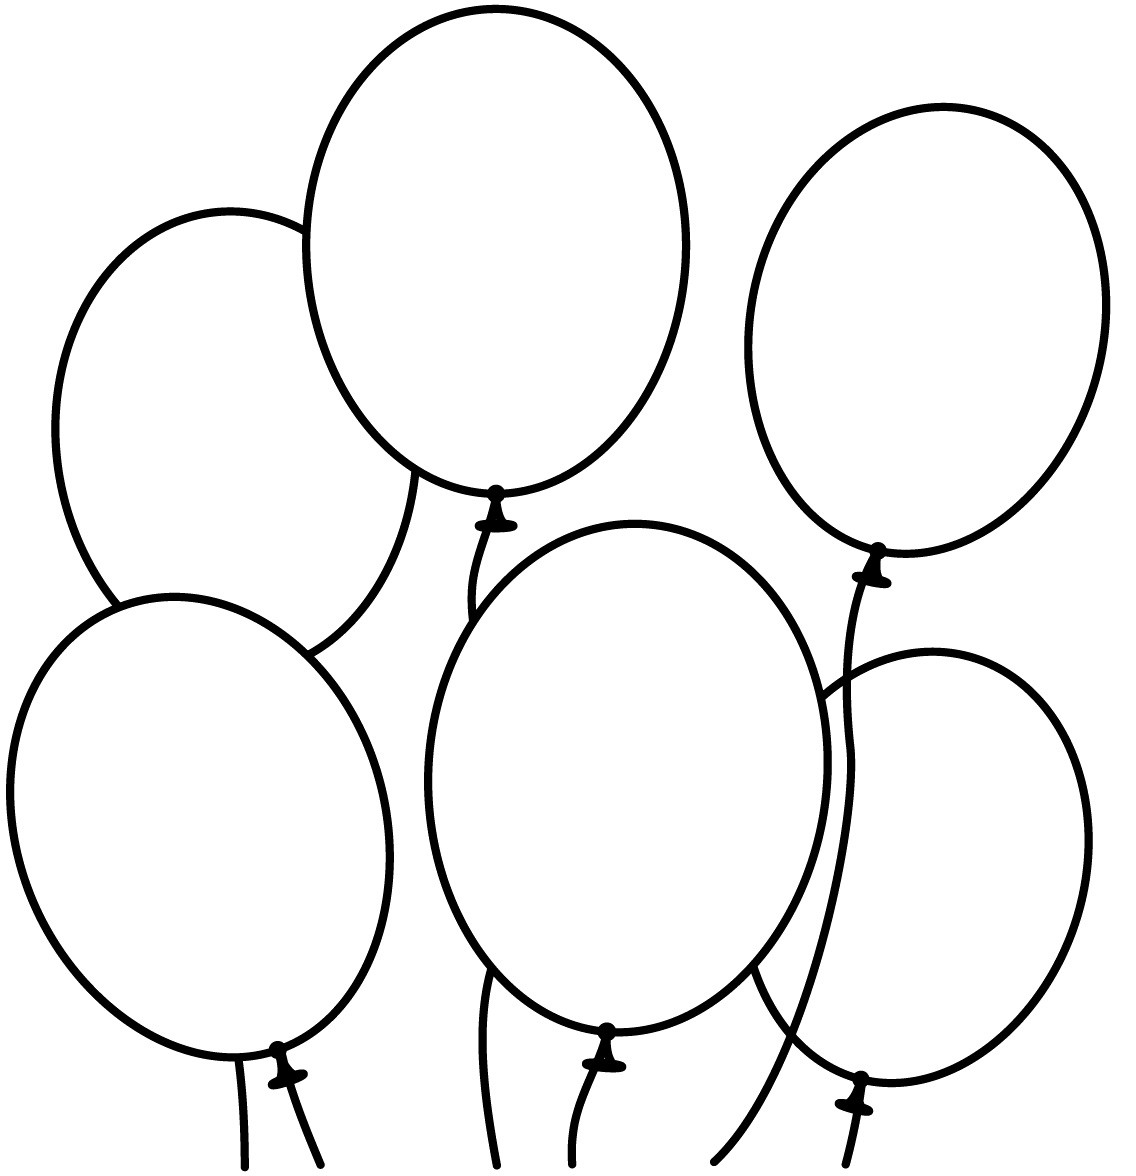 Balloon Coloring Pages Printable
 Six Beautiful Balloons Coloring Pages balloons Coloring